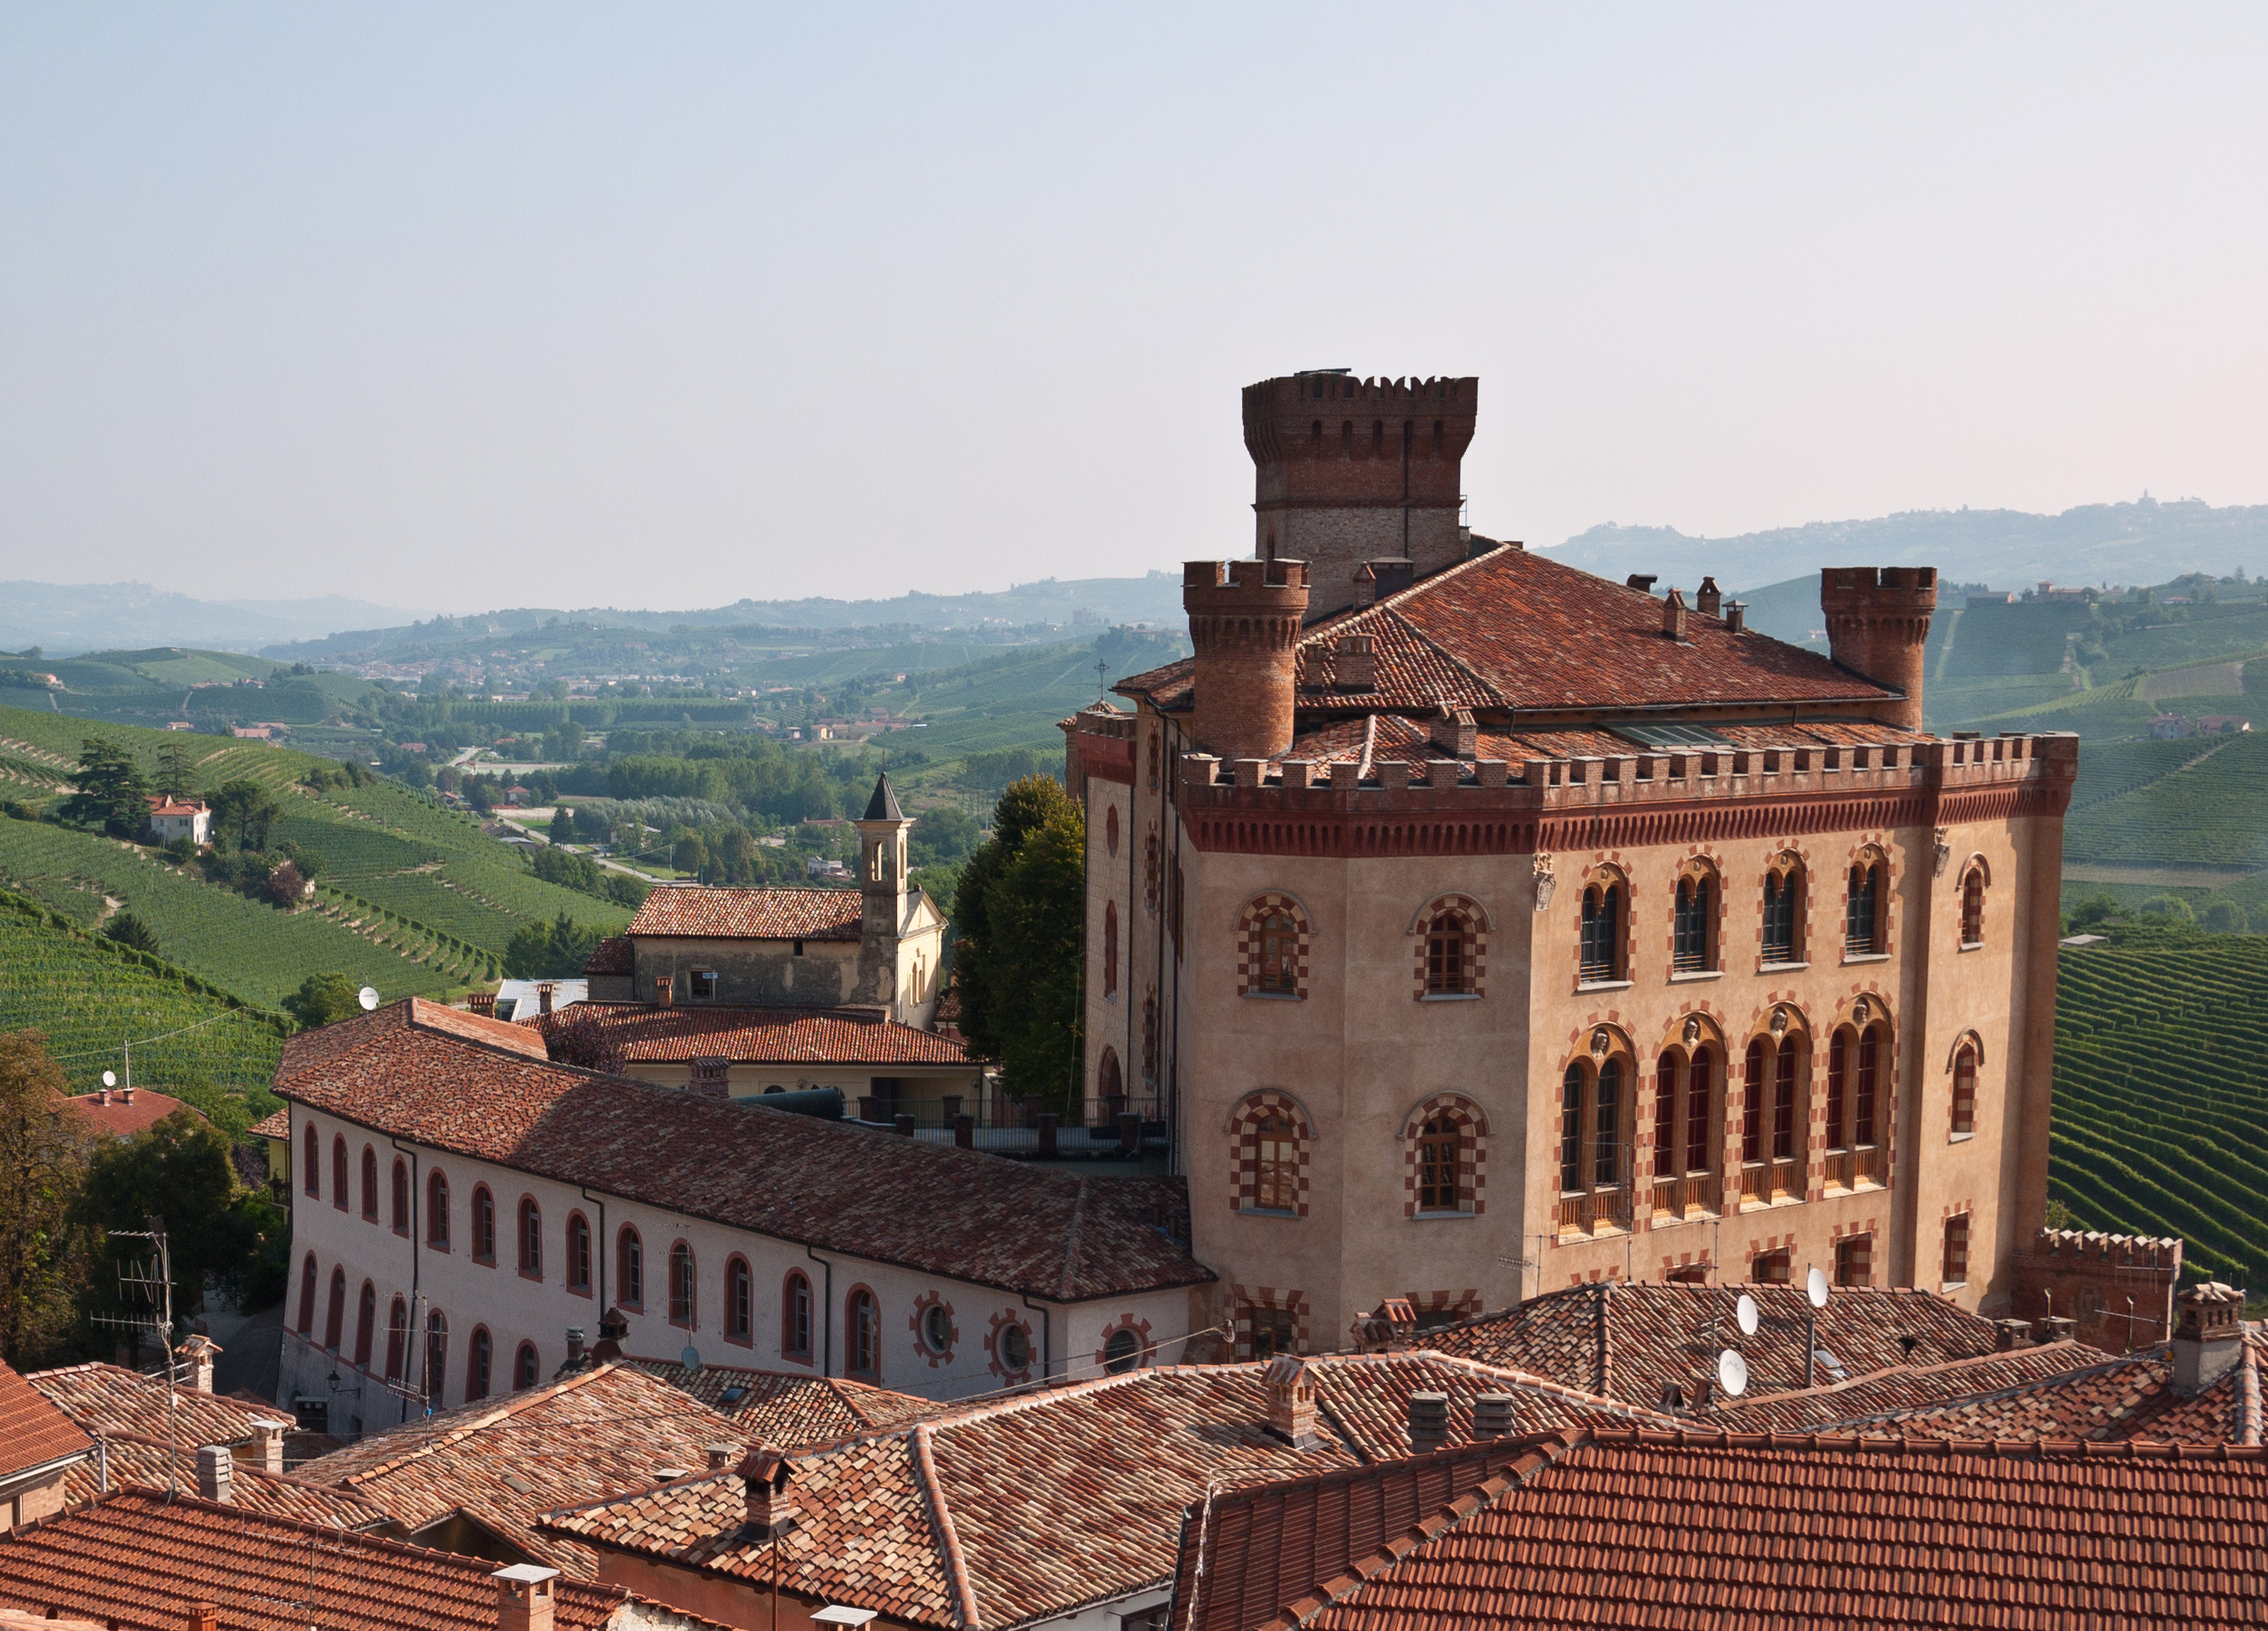 View of the castle in Barolo from the roof deck of the apartment we rented.